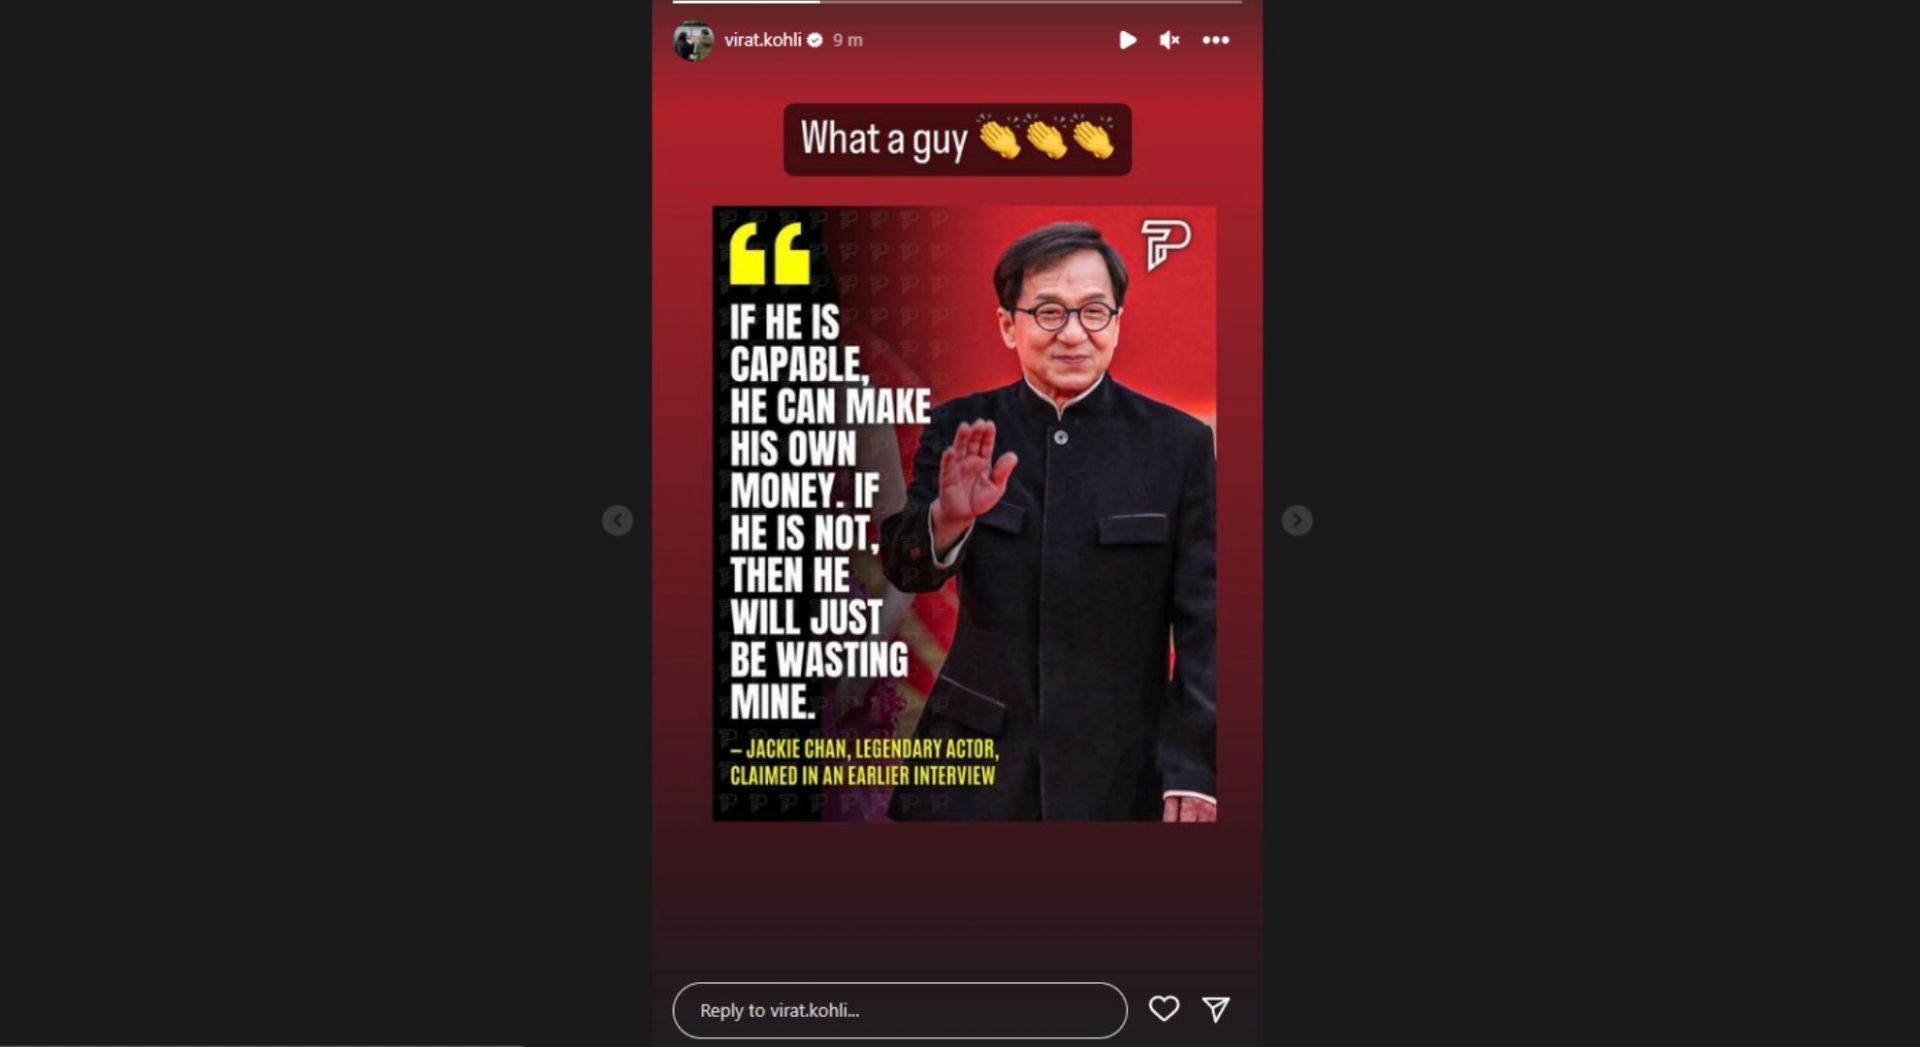 Virat Kohli shared a famous quote from legendary actor Jackie Chan.